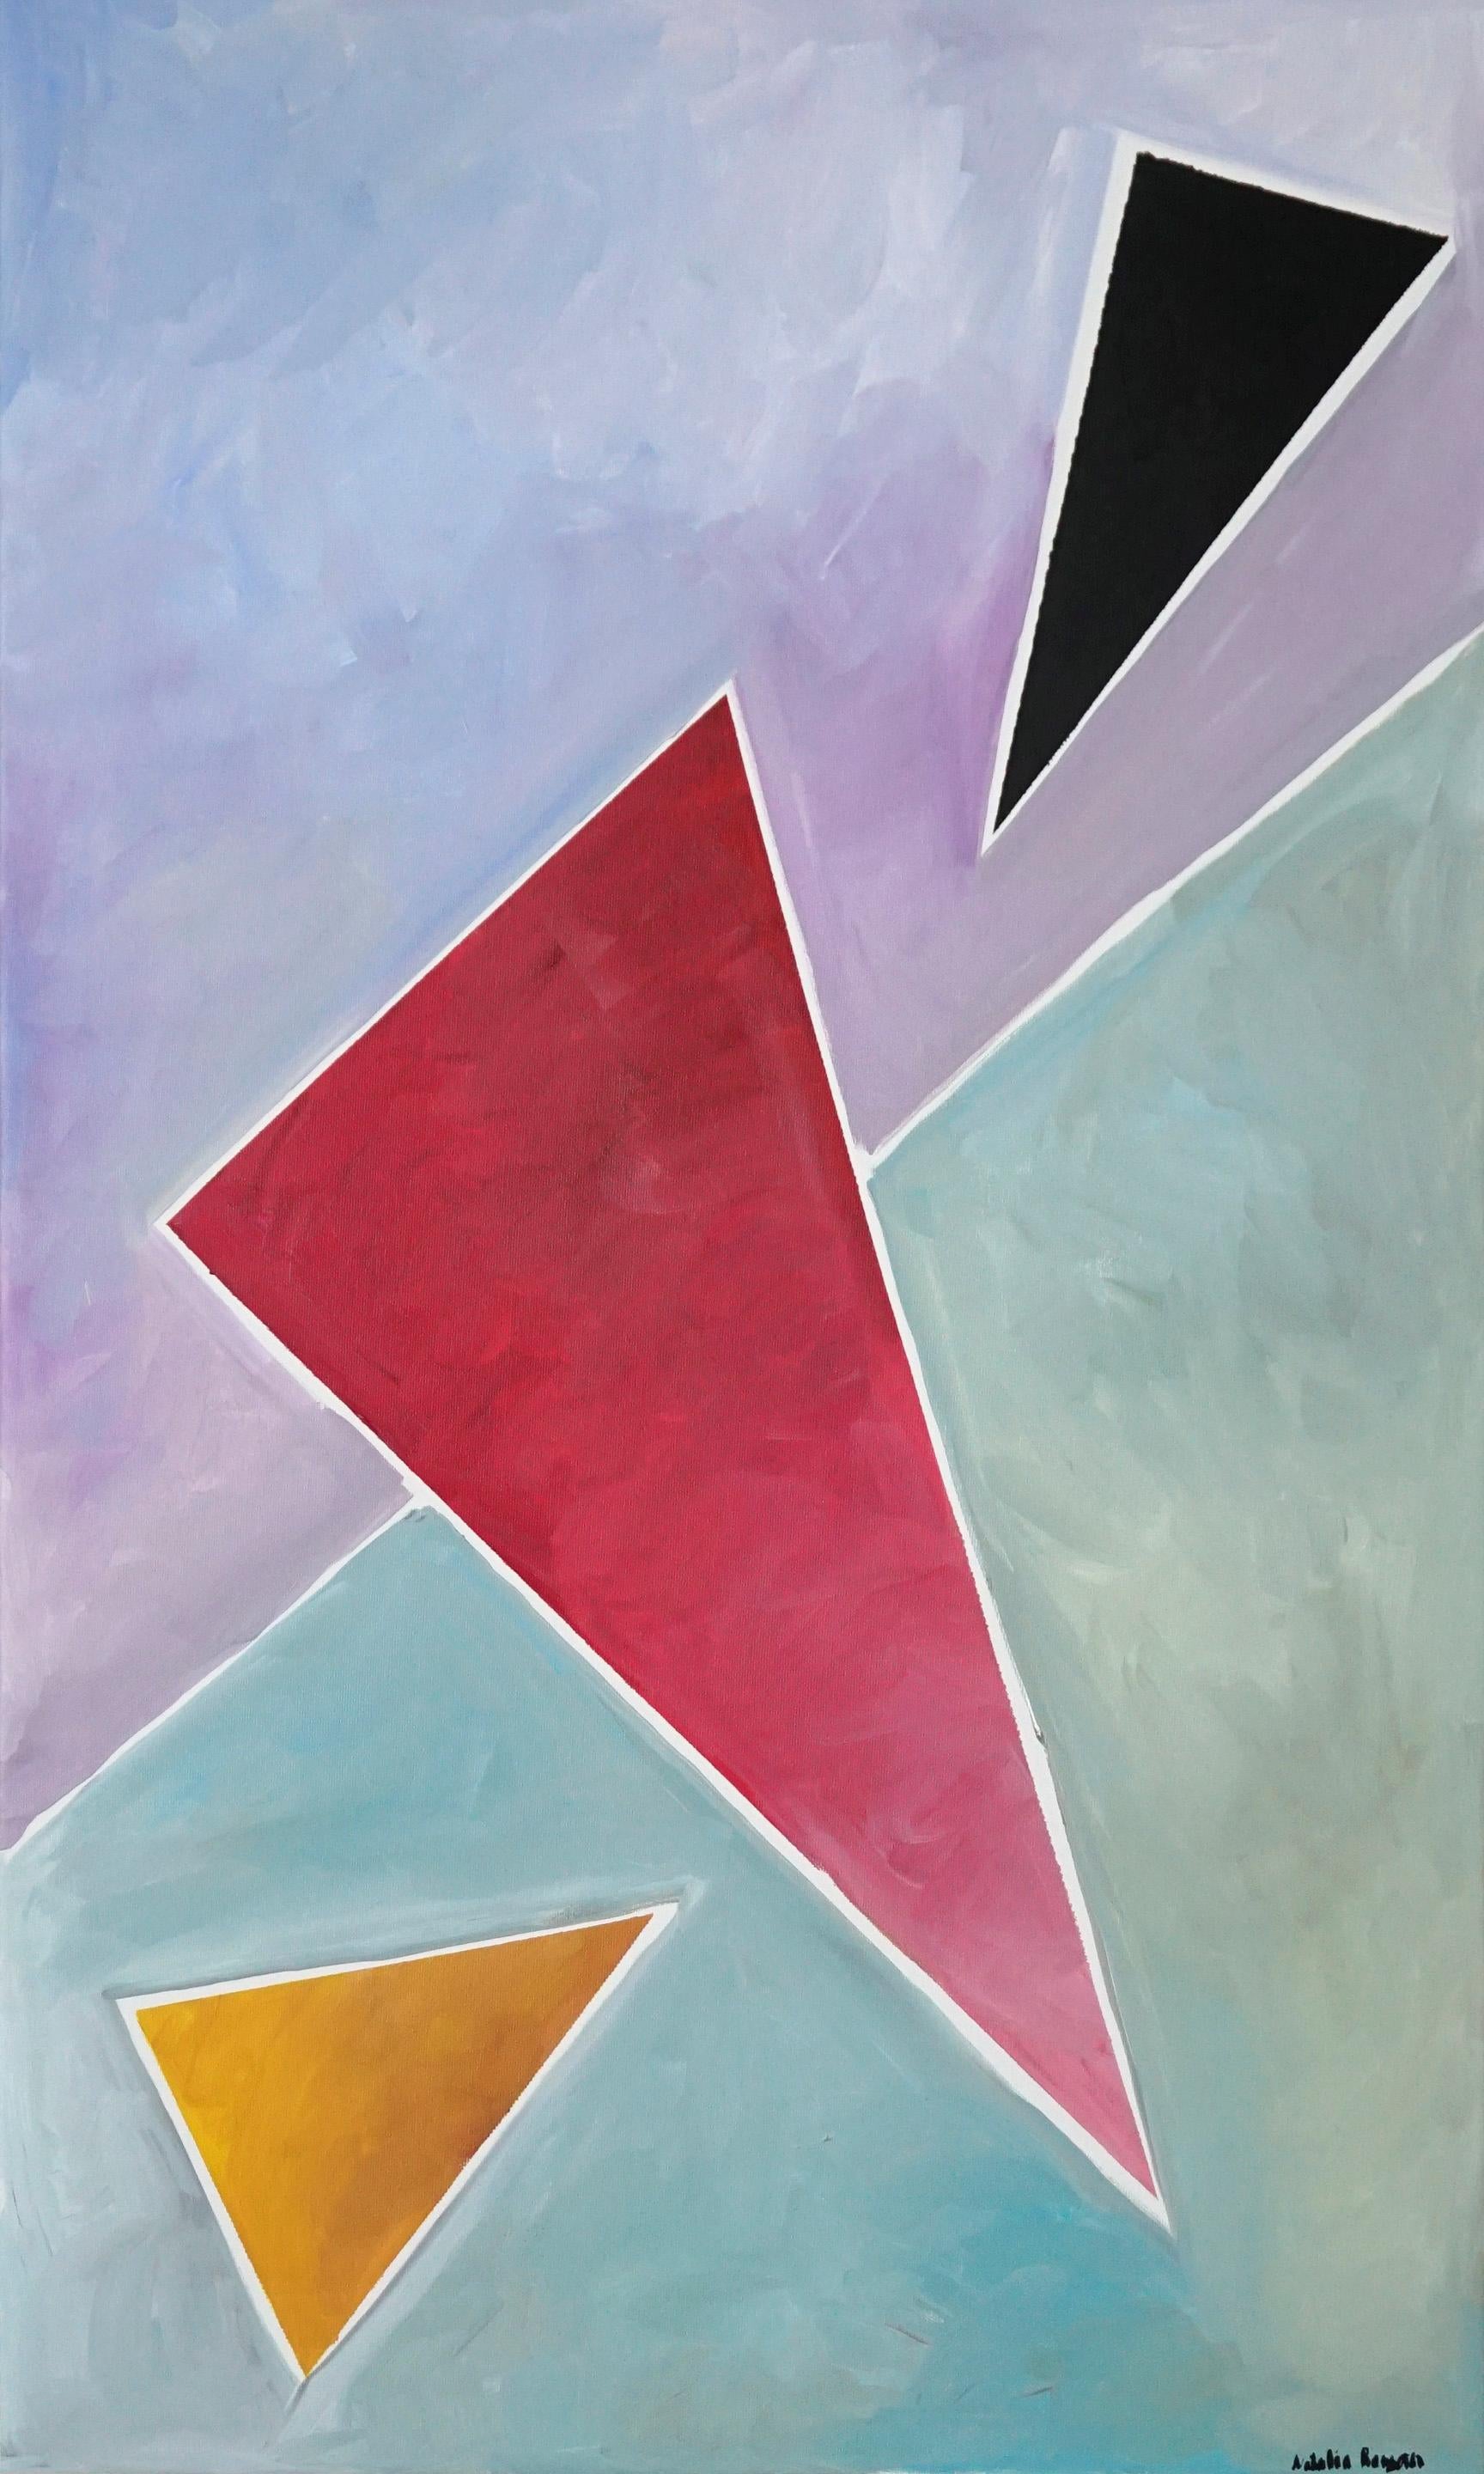 Natalia Roman Abstract Painting - Diagonal Triangle Dream, Abstract Geometric Painting on Linen, Pastel Tones 2021